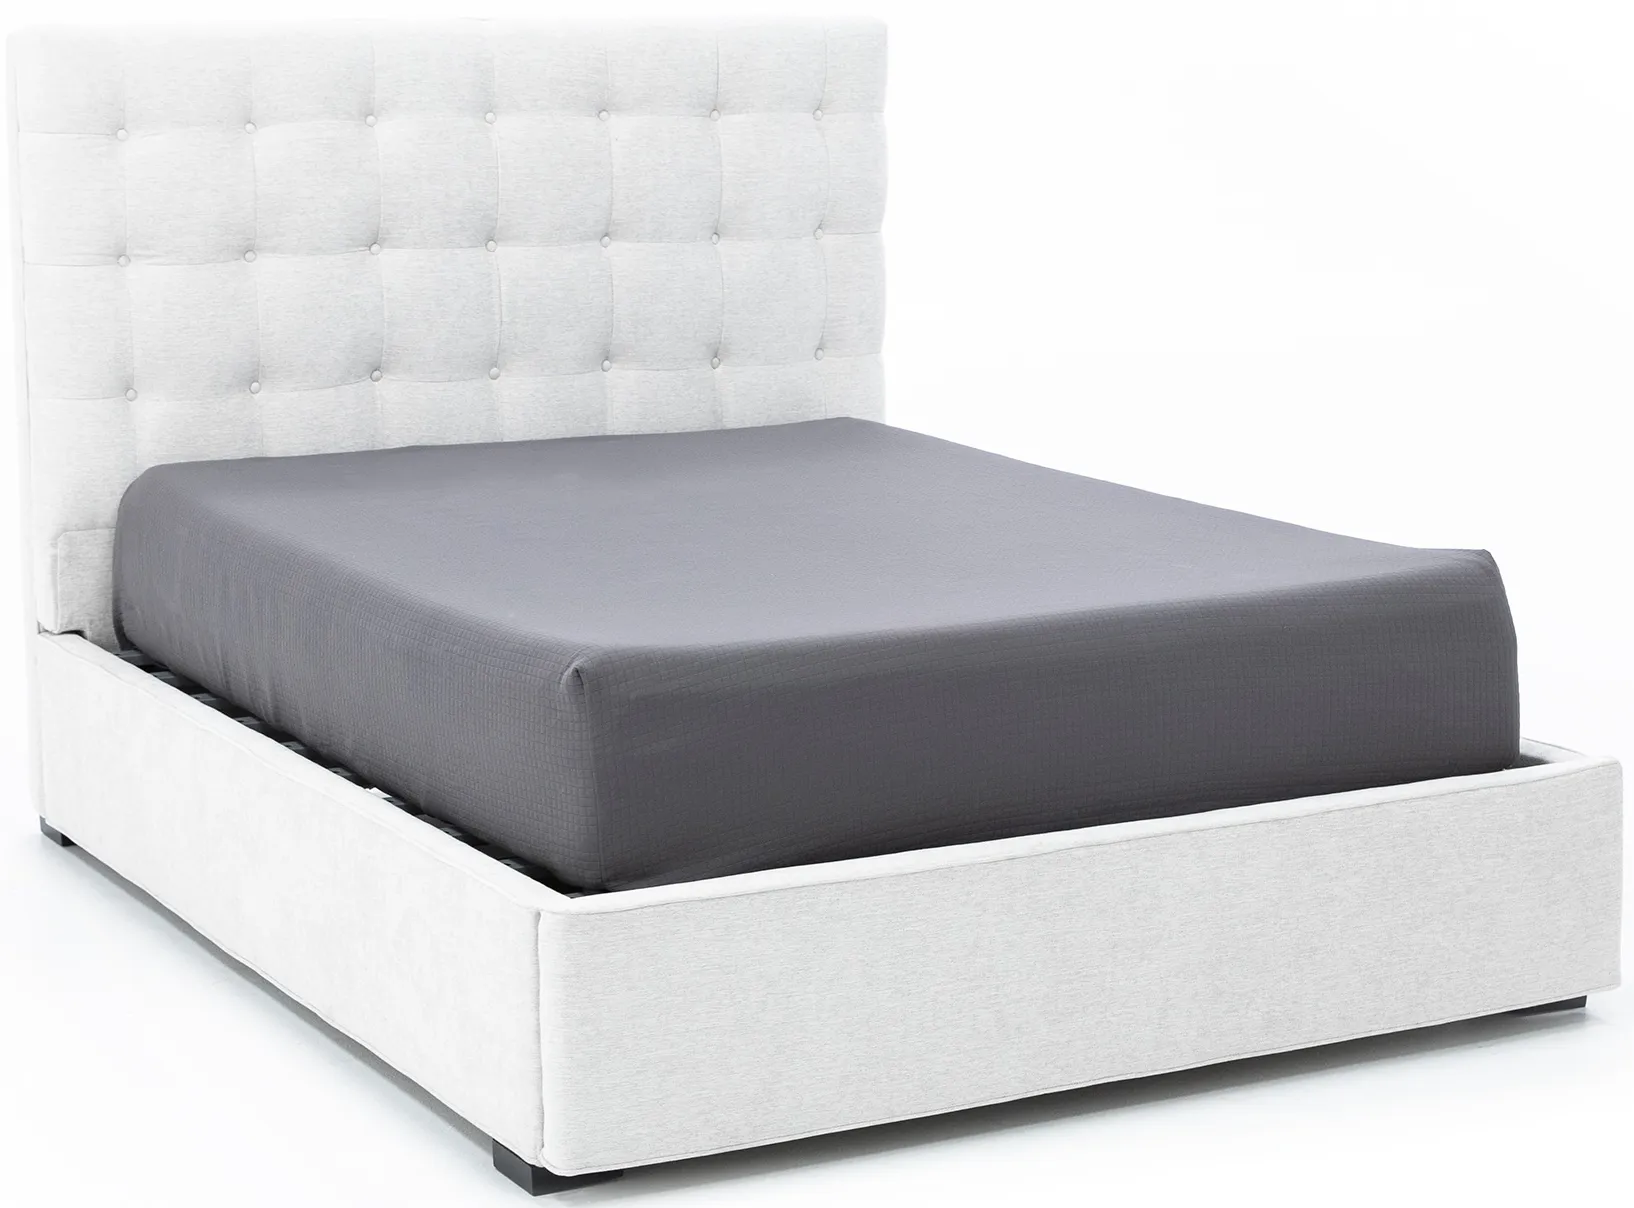 Abby Full Upholstered Storage Bed (Discontinued Slats)